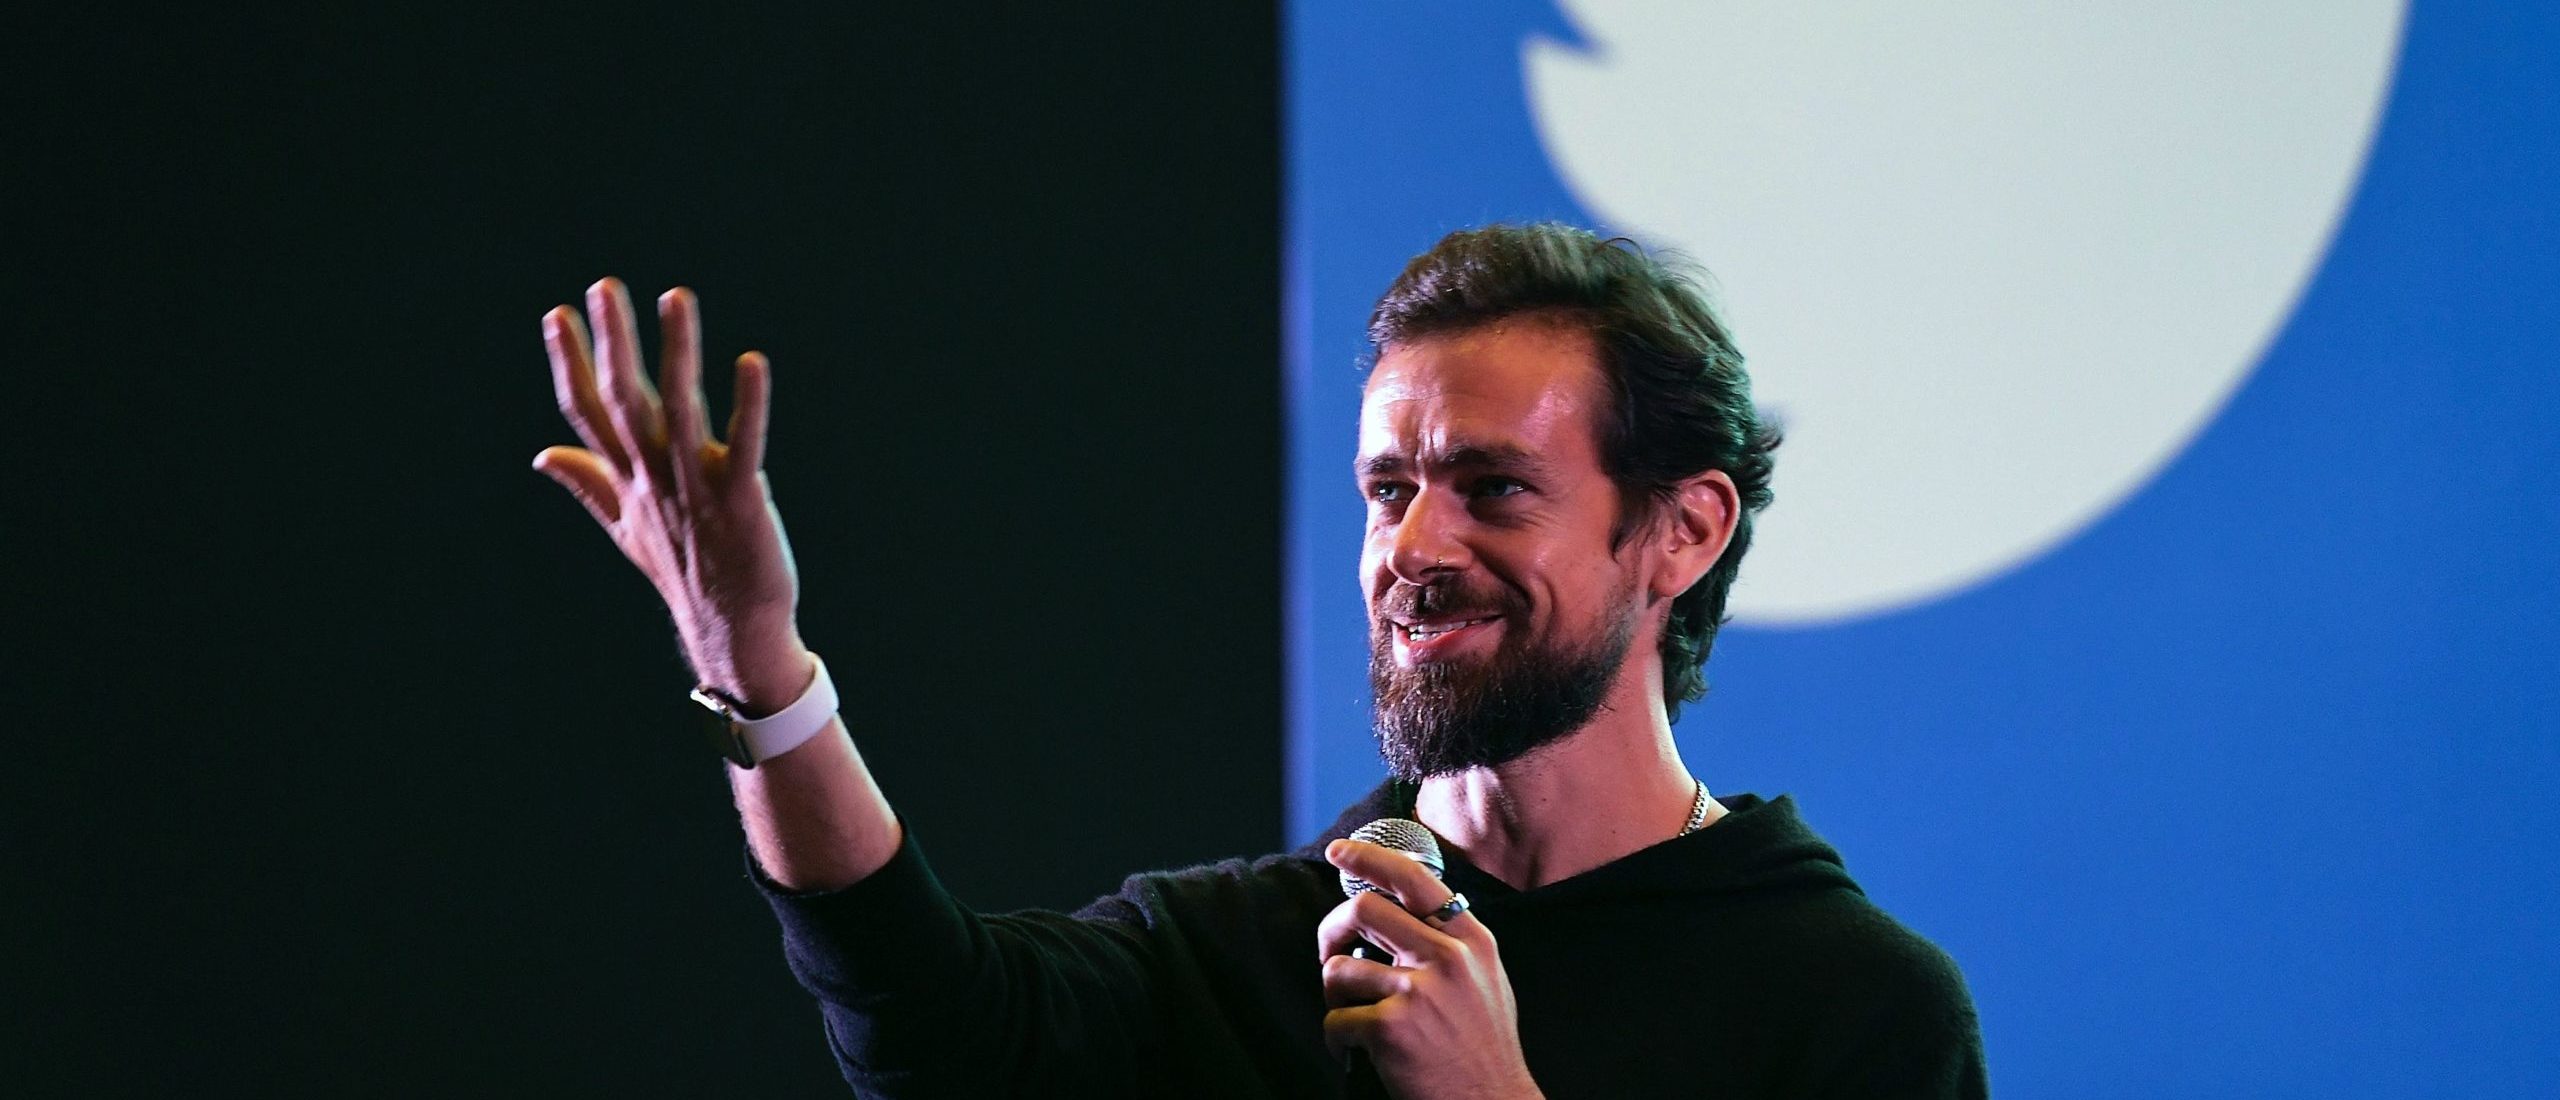 Twitter CEO and co-founder Jack Dorsey gestures while speaking at a town hall meeting. (Photo by PRAKASH SINGH/AFP via Getty Images)